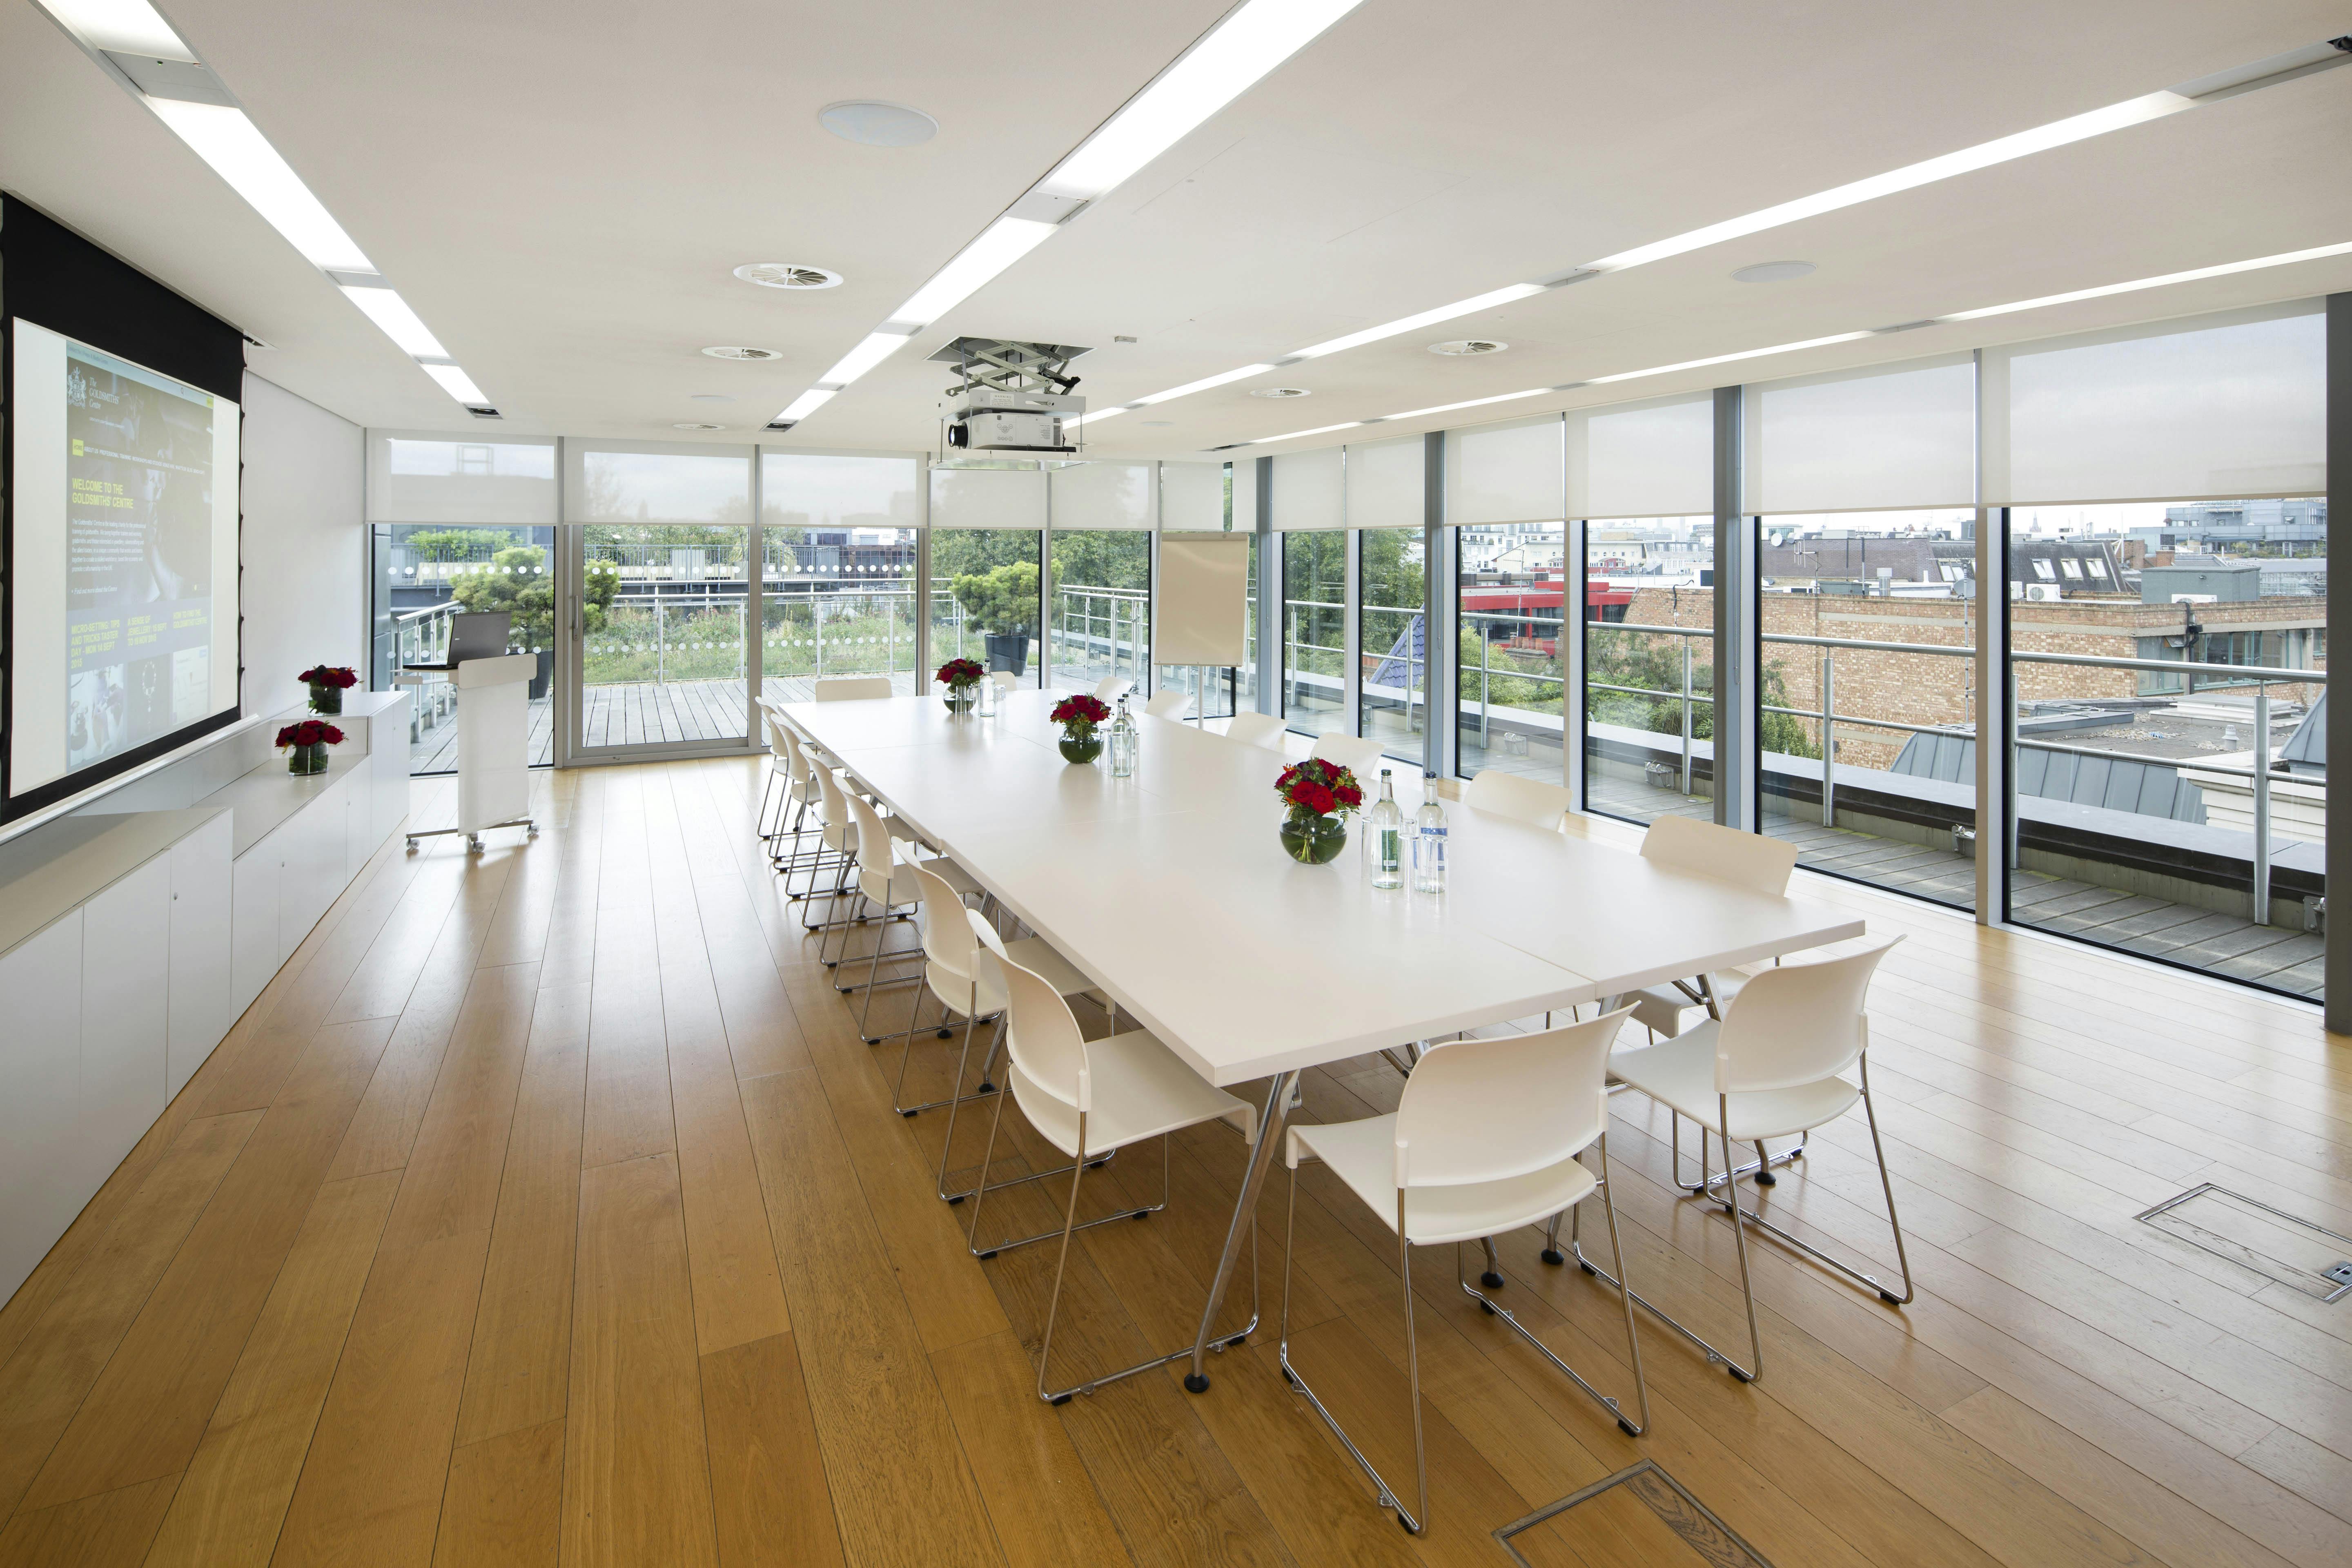 The Goldsmiths' Centre - Agas Harding Conference Room image 4